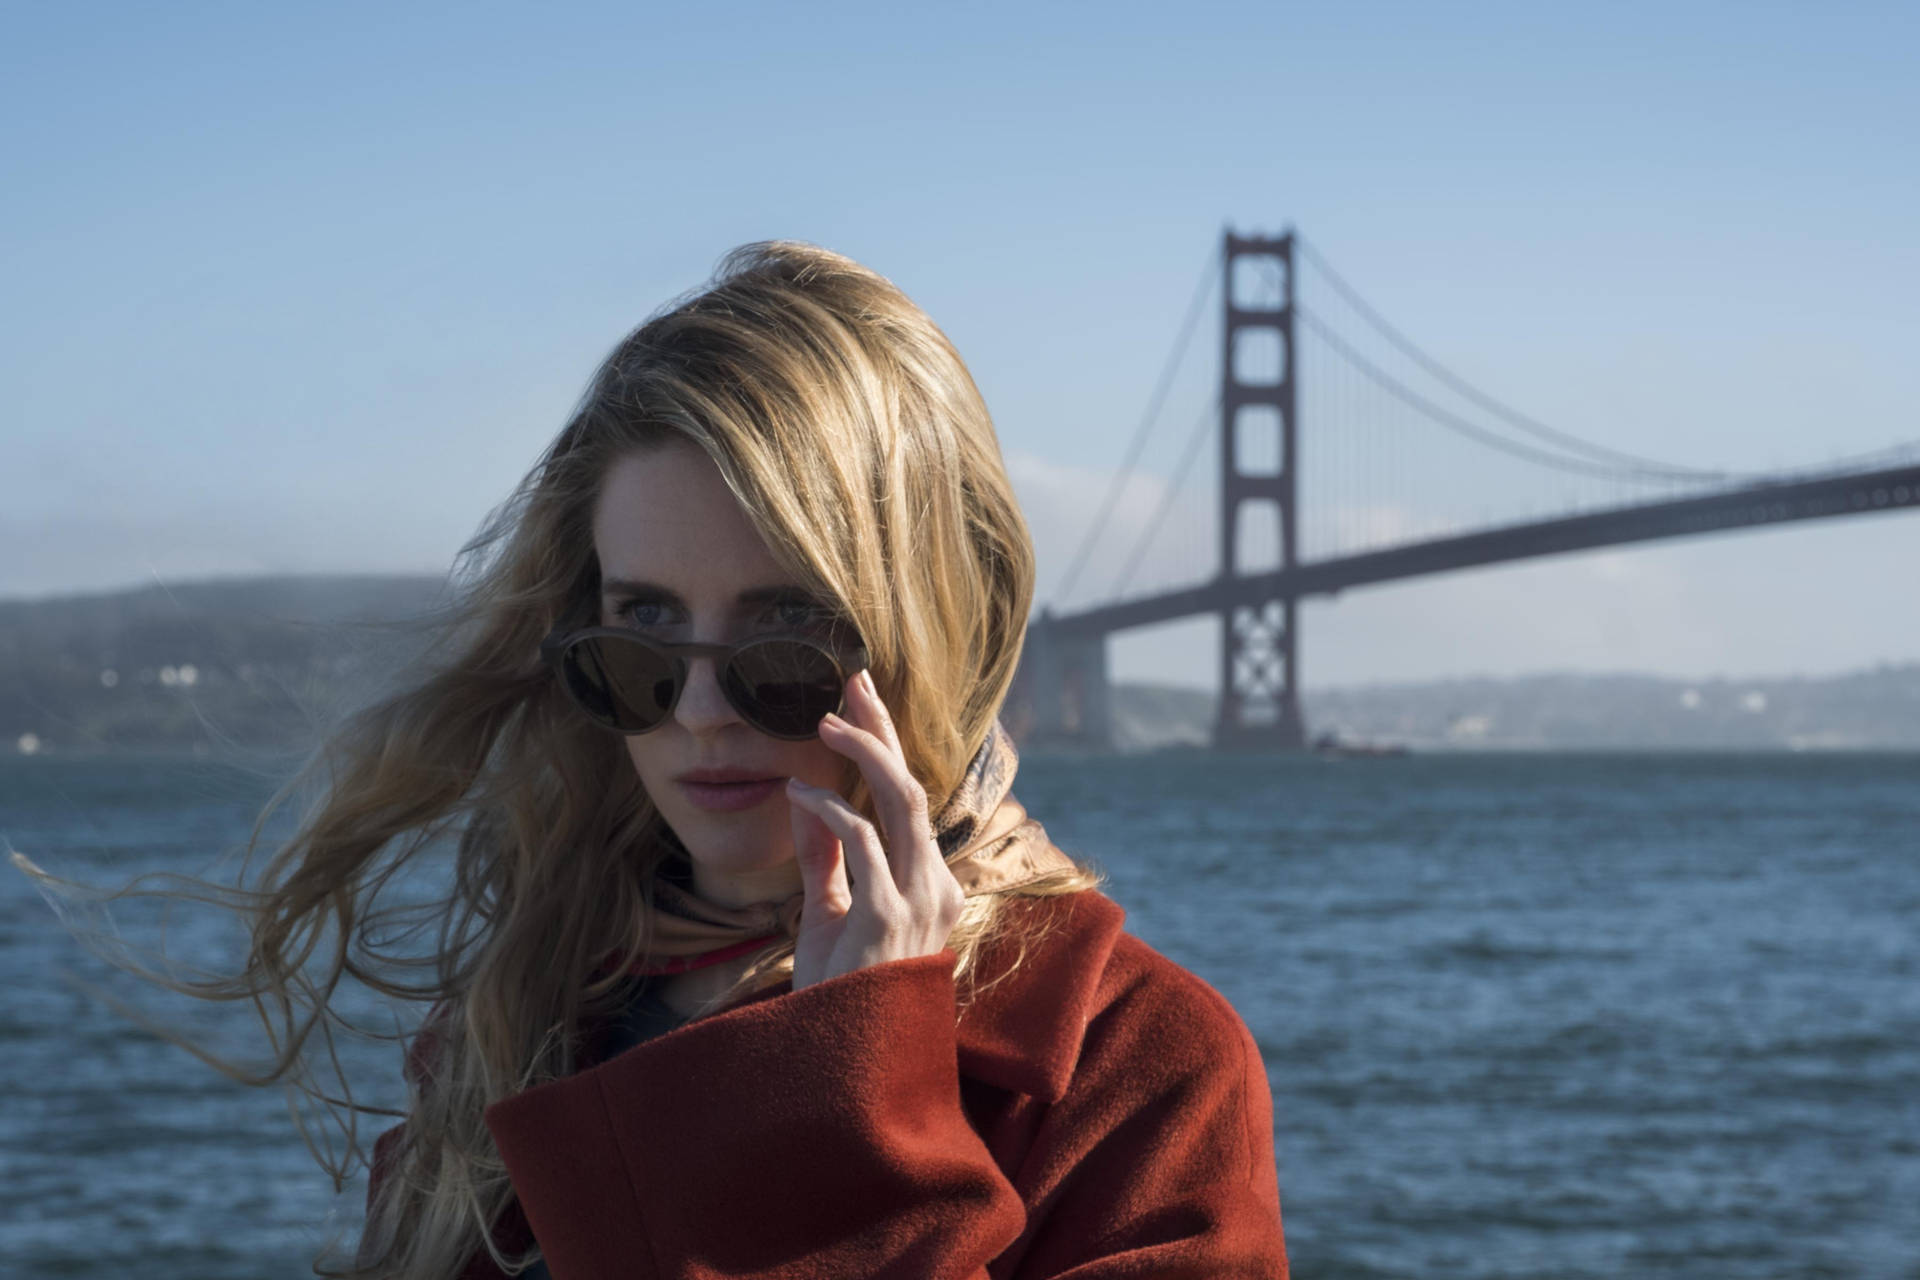 Prairie Johnson Of The Oa With Sunglasses Picture